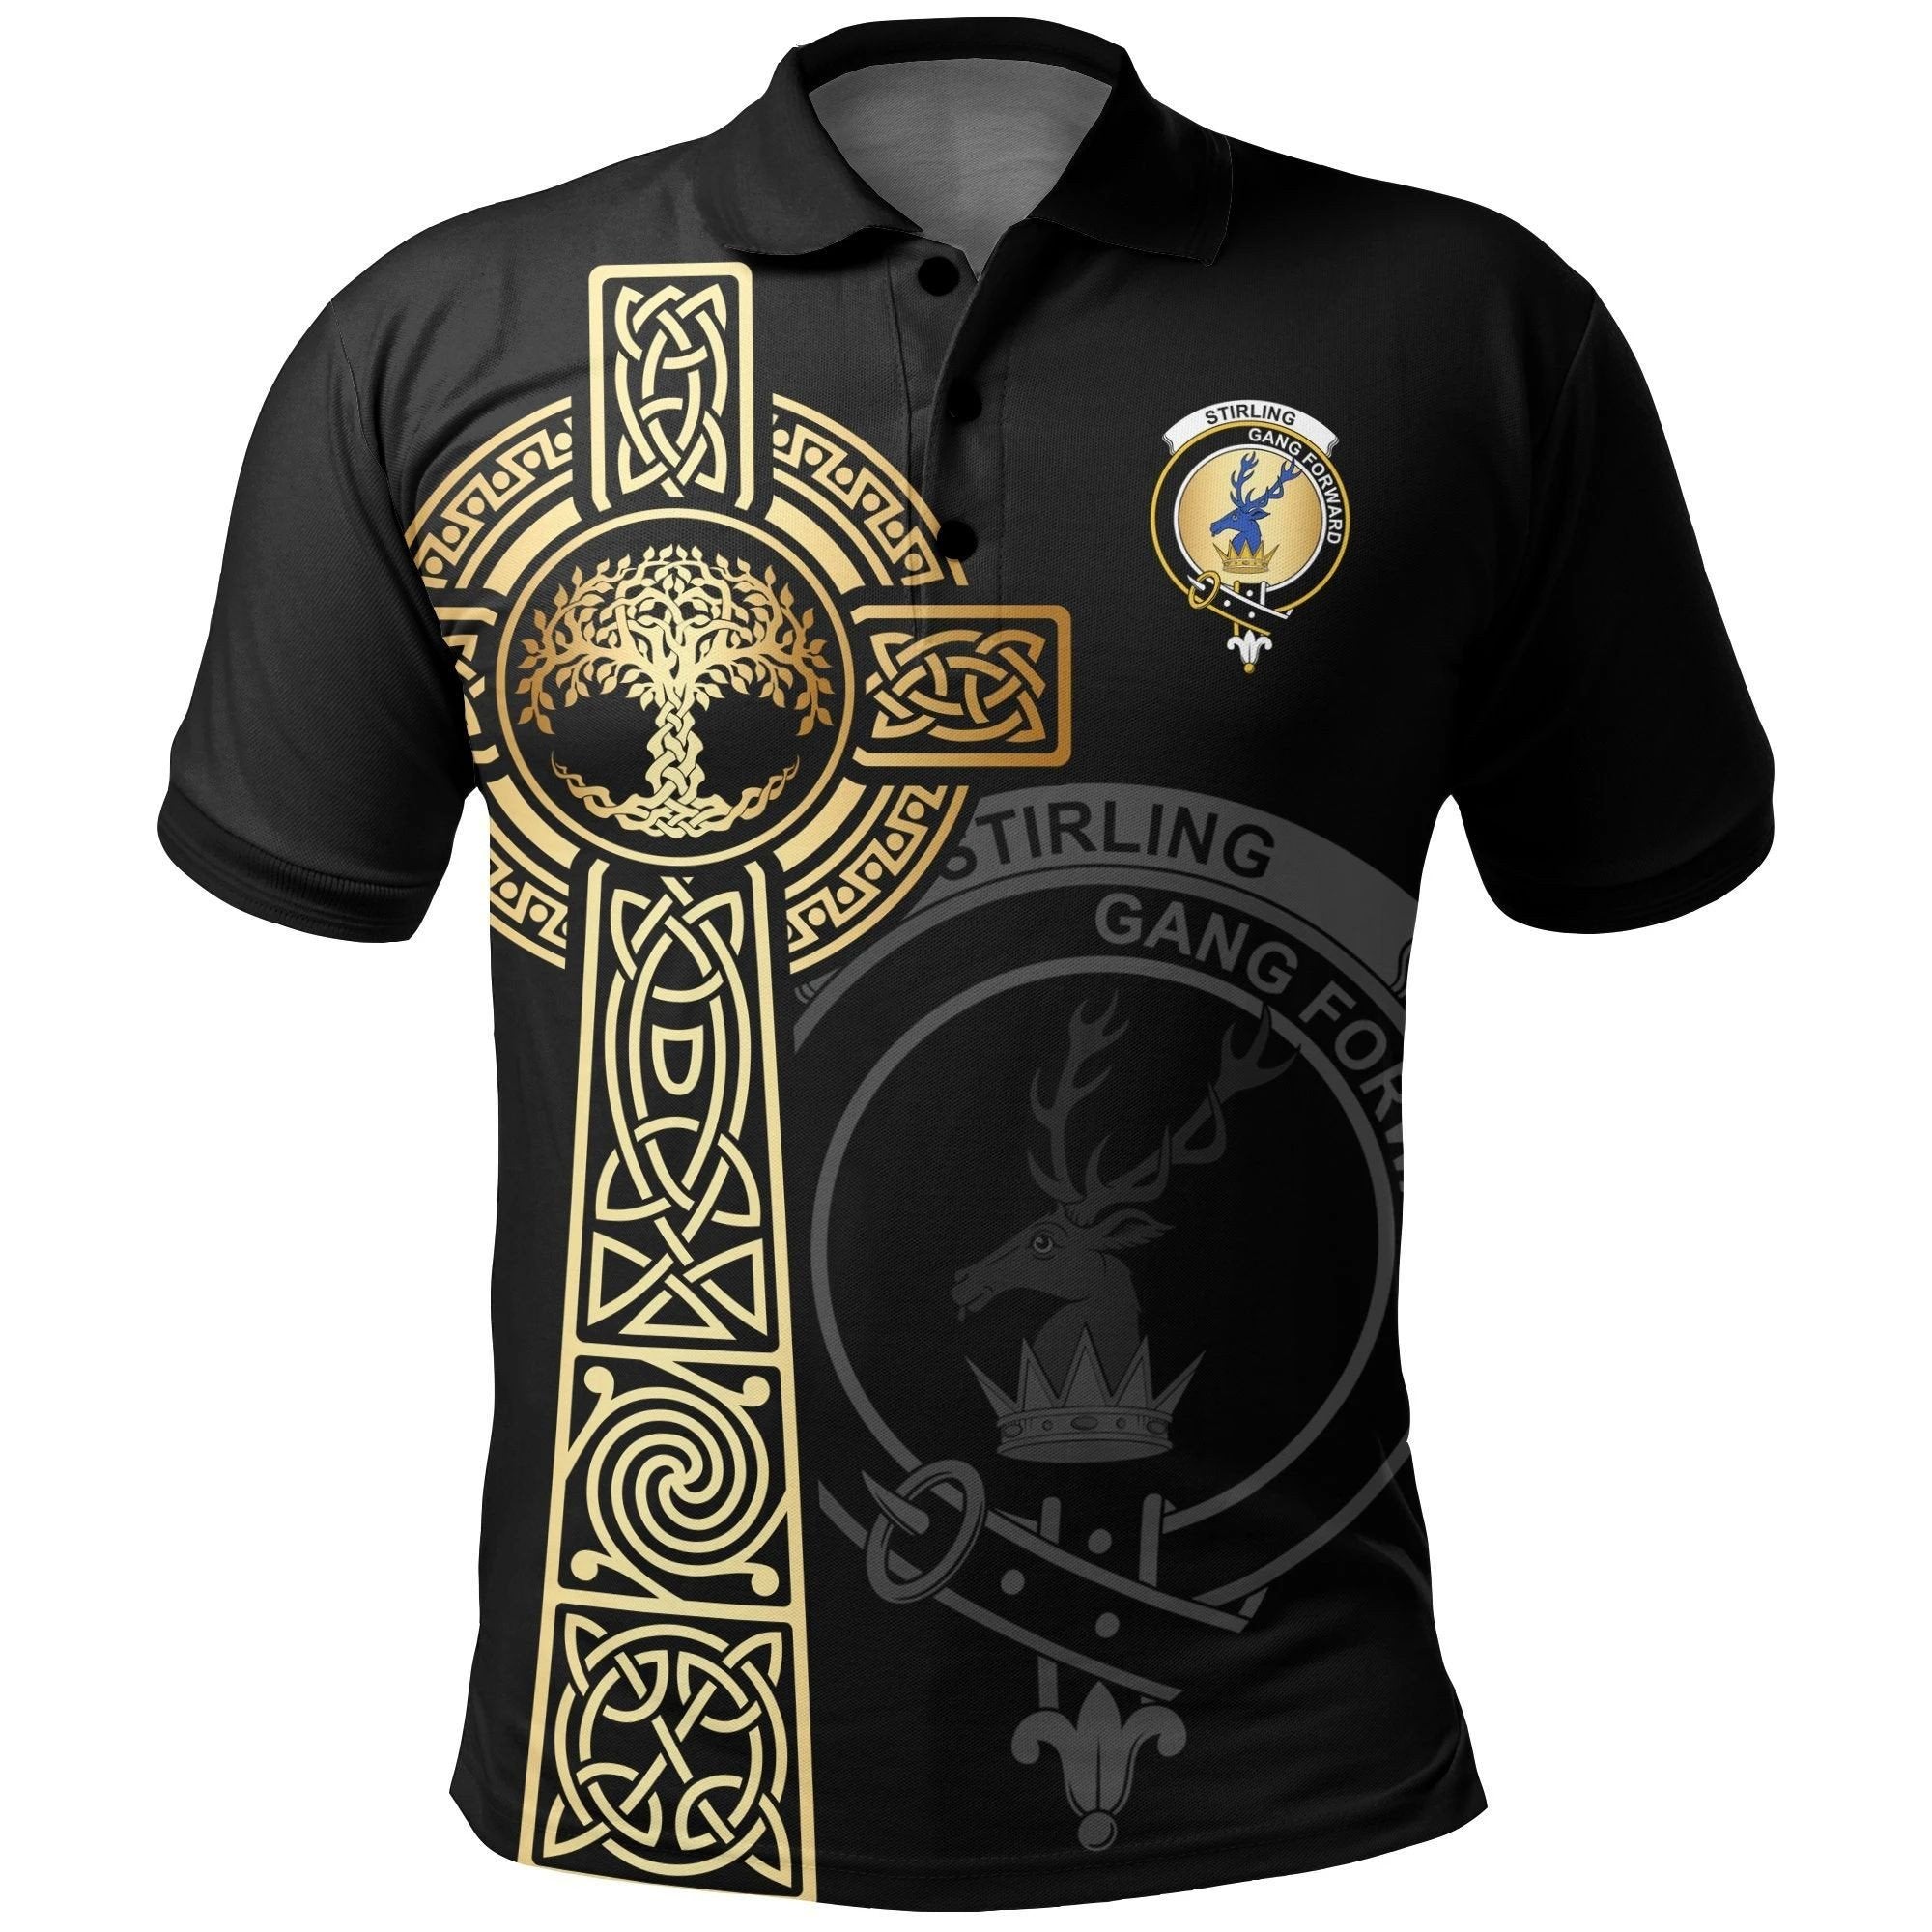 Stirling (of Cadder-Present Chief) Clan Polo Shirt, Scottish Tartan Stirling (of Cadder-Present Chief) Clans Polo Shirt Tree Of Life Style